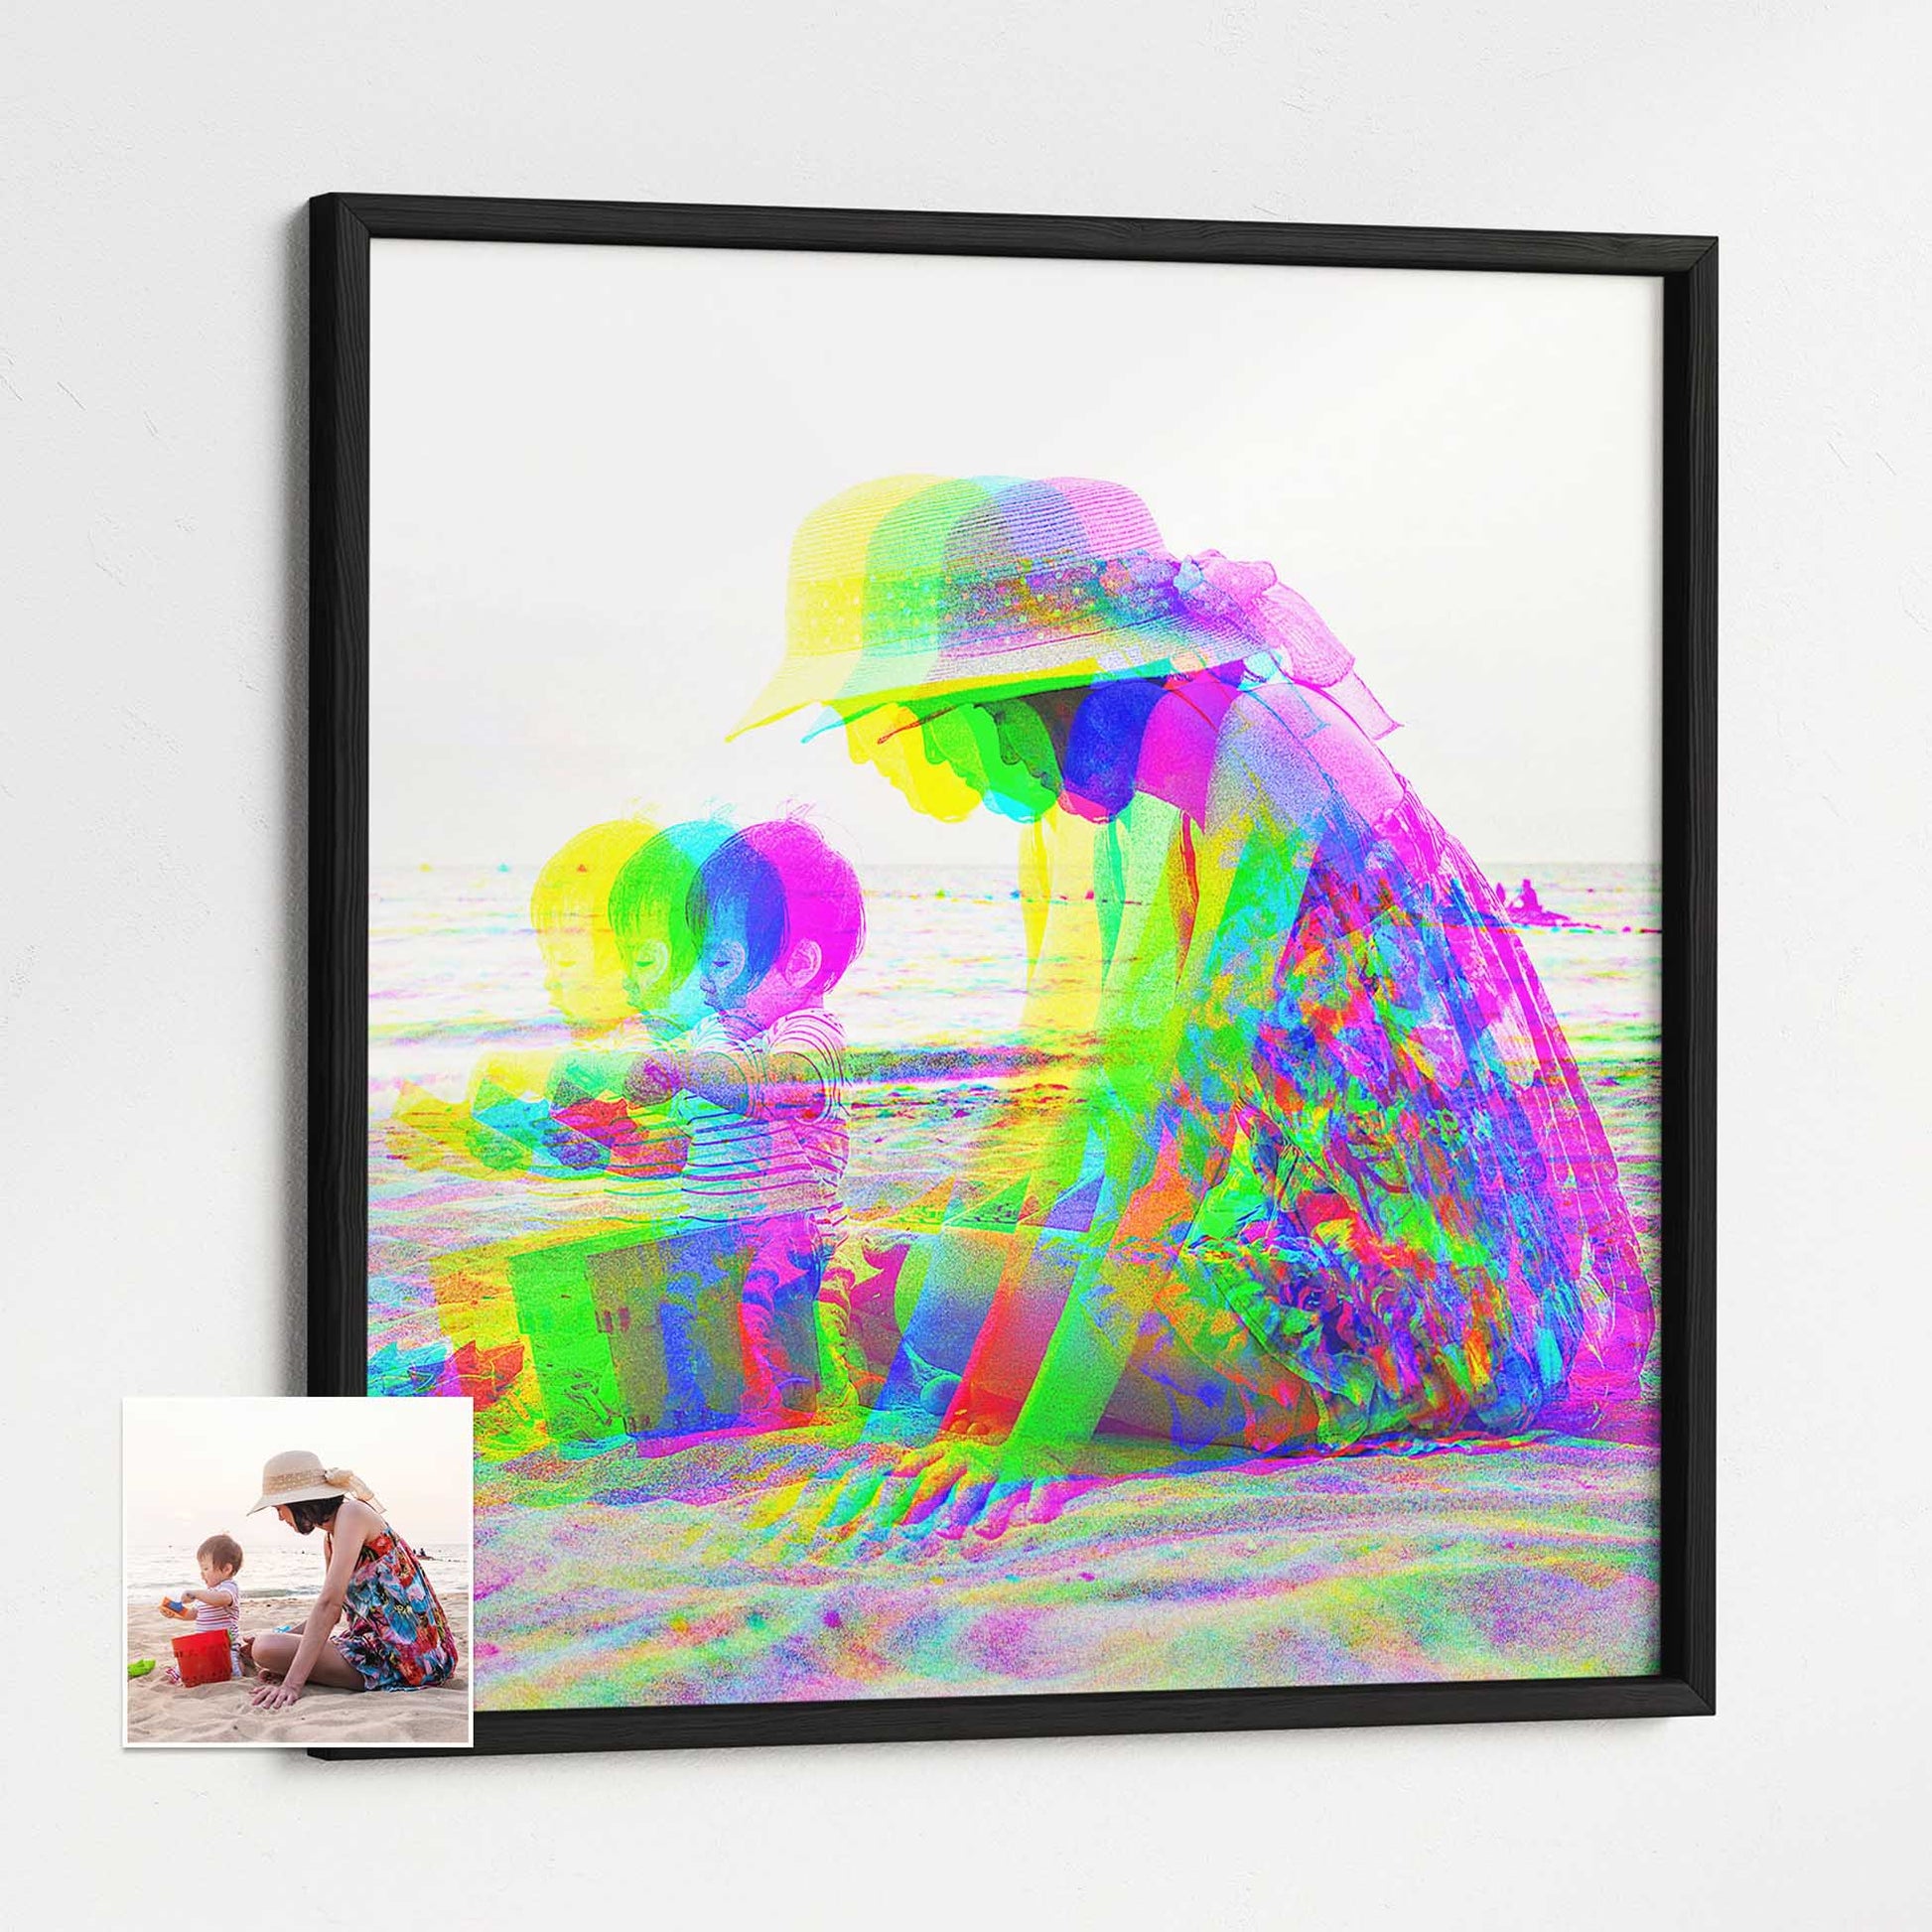 Enhance Your Space: Add a touch of artistic flair to your surroundings with this stunning anaglyph print. The combination of digital artwork and 3D technology creates a captivating visual impact that transforms any space into a gallery-like